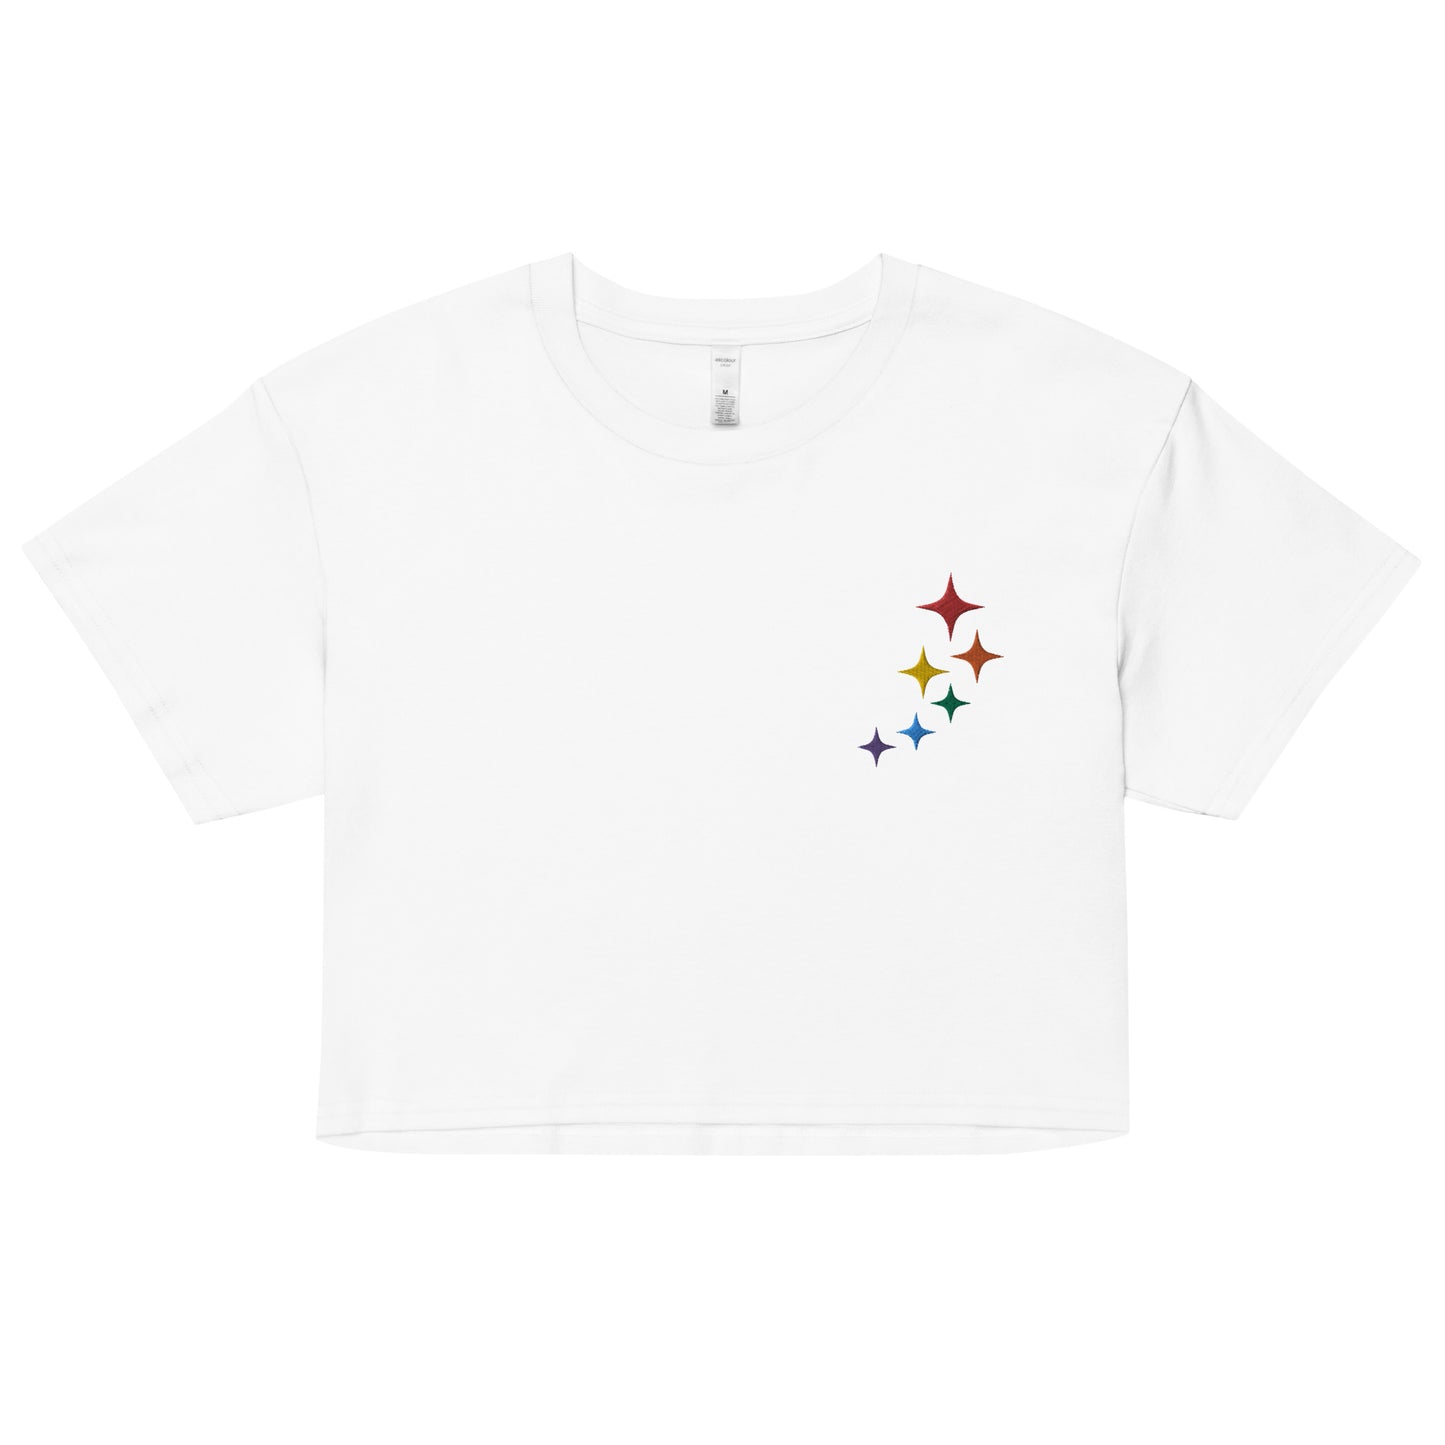 A relaxed, modest white crop top features a subtle rainbow stars embroidery. Adding a touch of rainbow to your look—a playful celebration of lgbtq culture! Made from 100% combed cotton. Available in Extra Small, Small, Medium, Large, Extra Large.